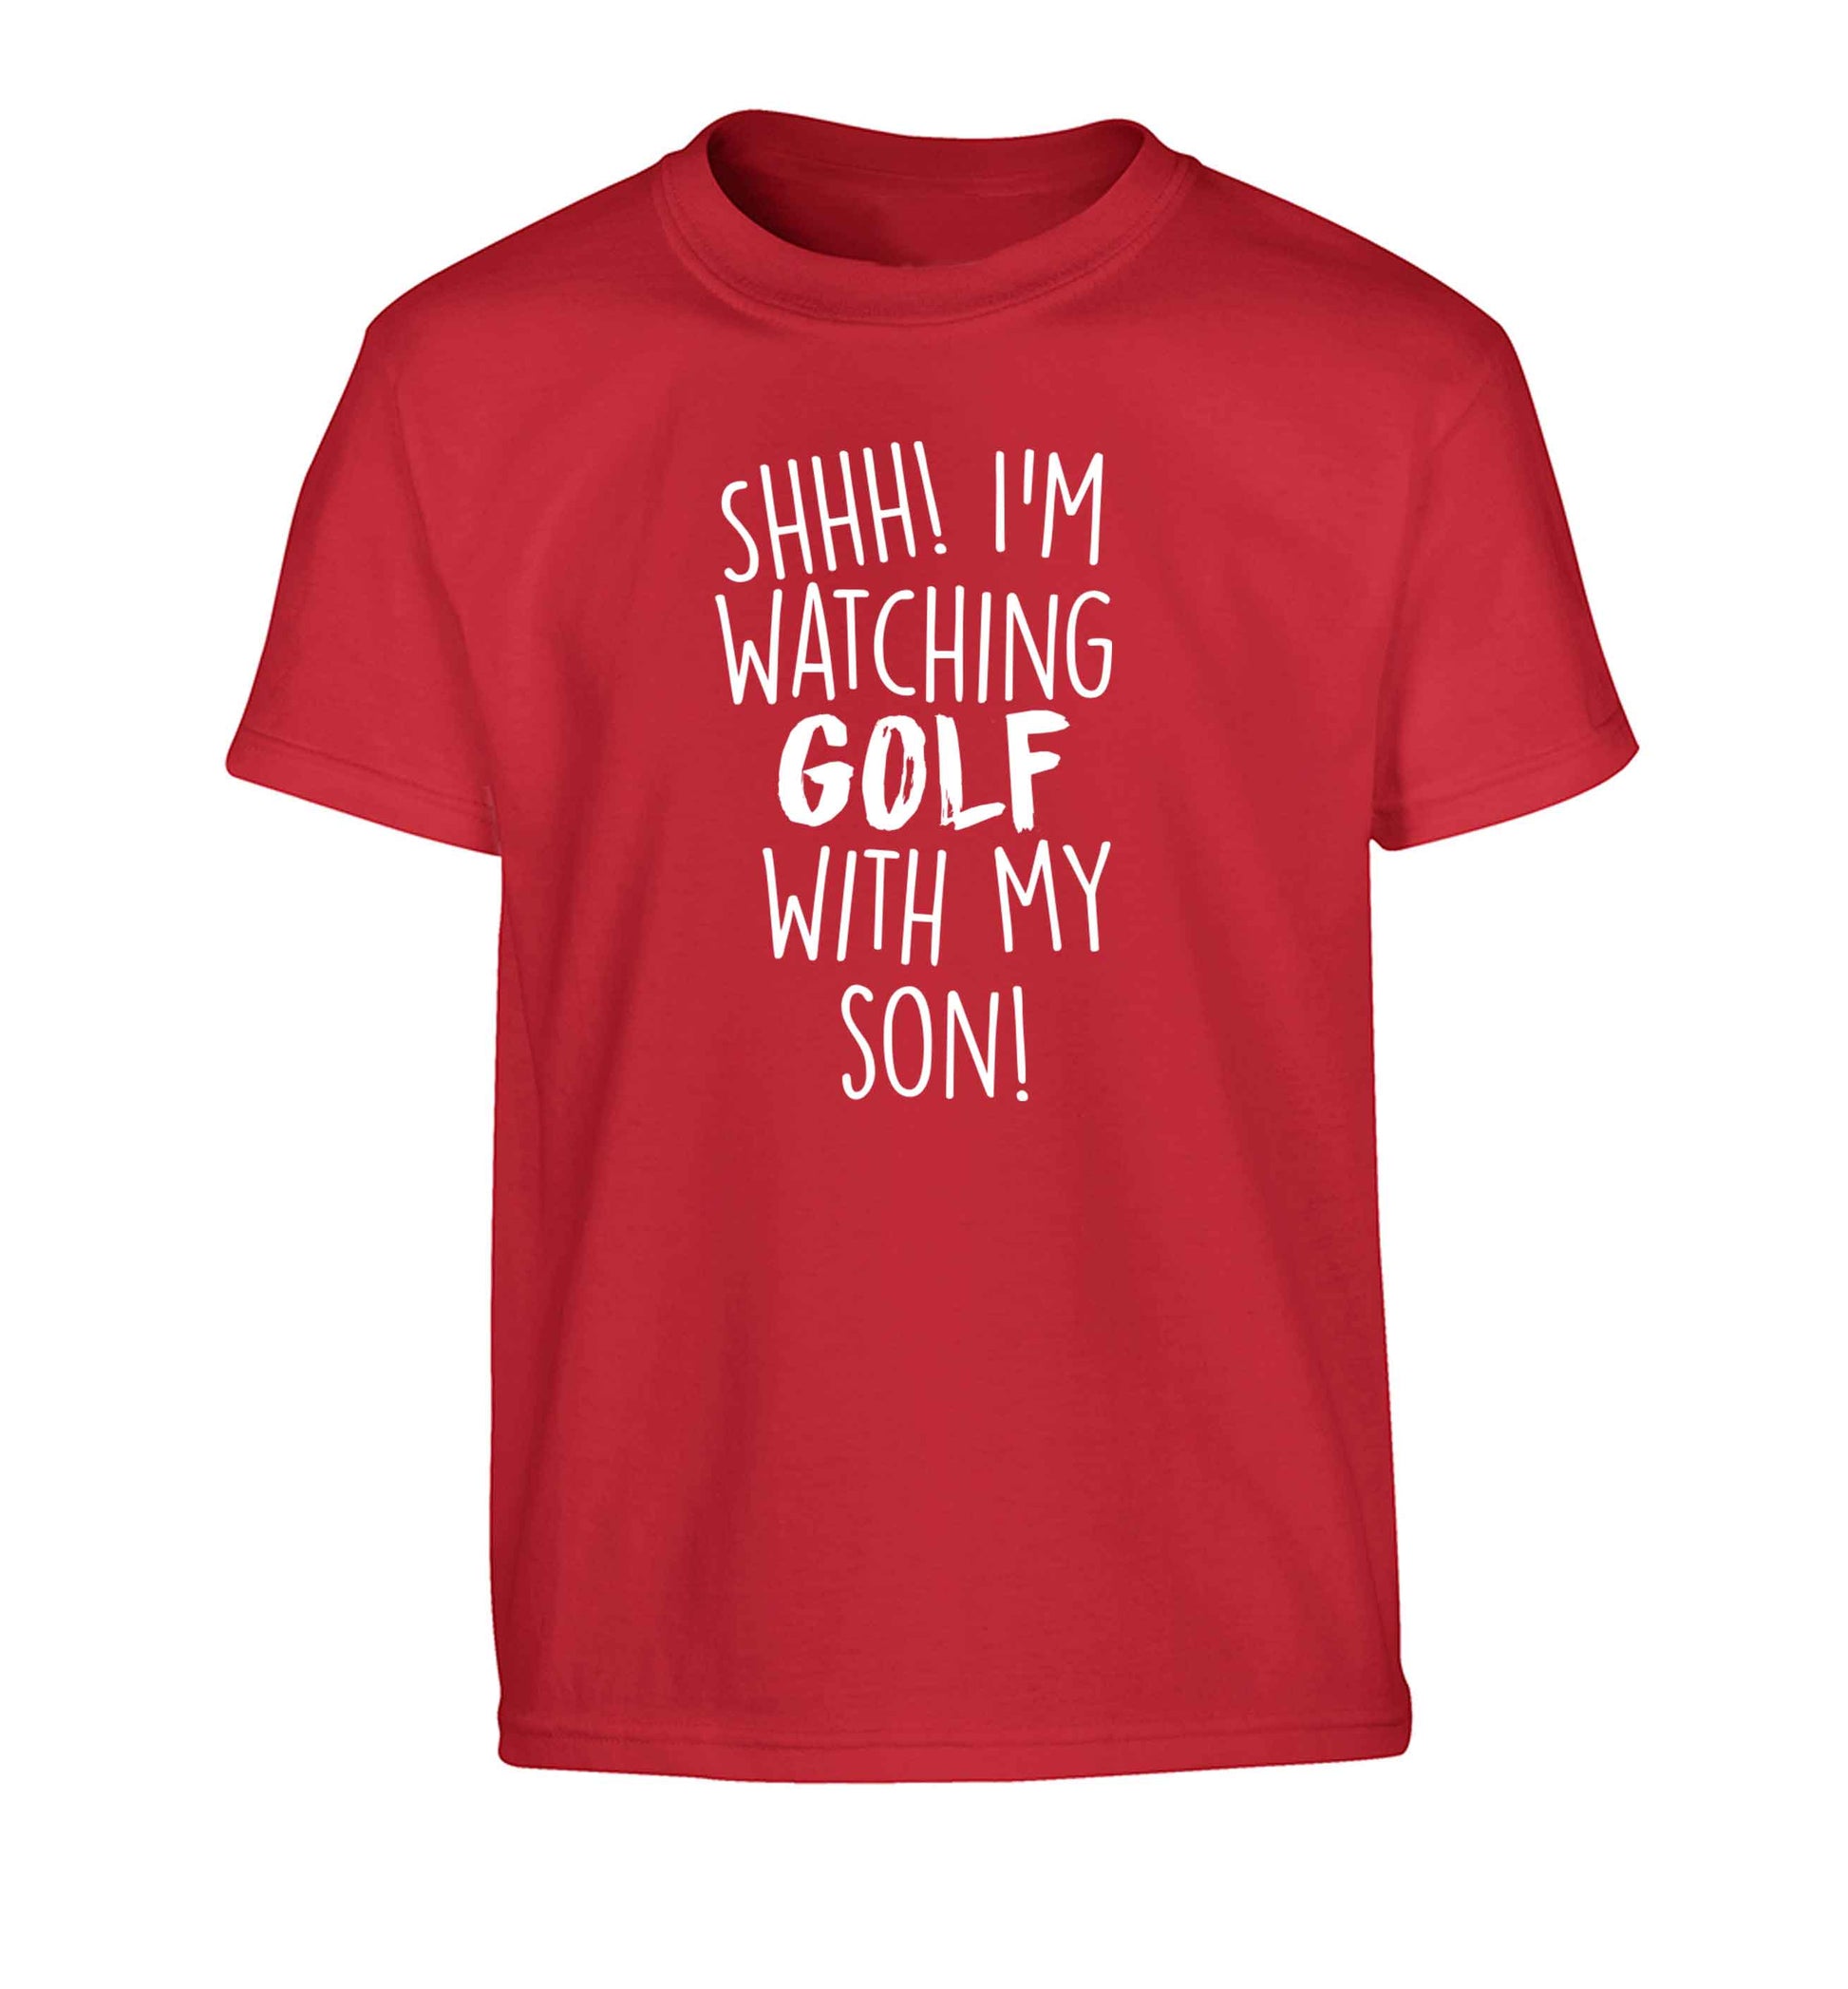 Shh I'm watching golf with my son Children's red Tshirt 12-13 Years